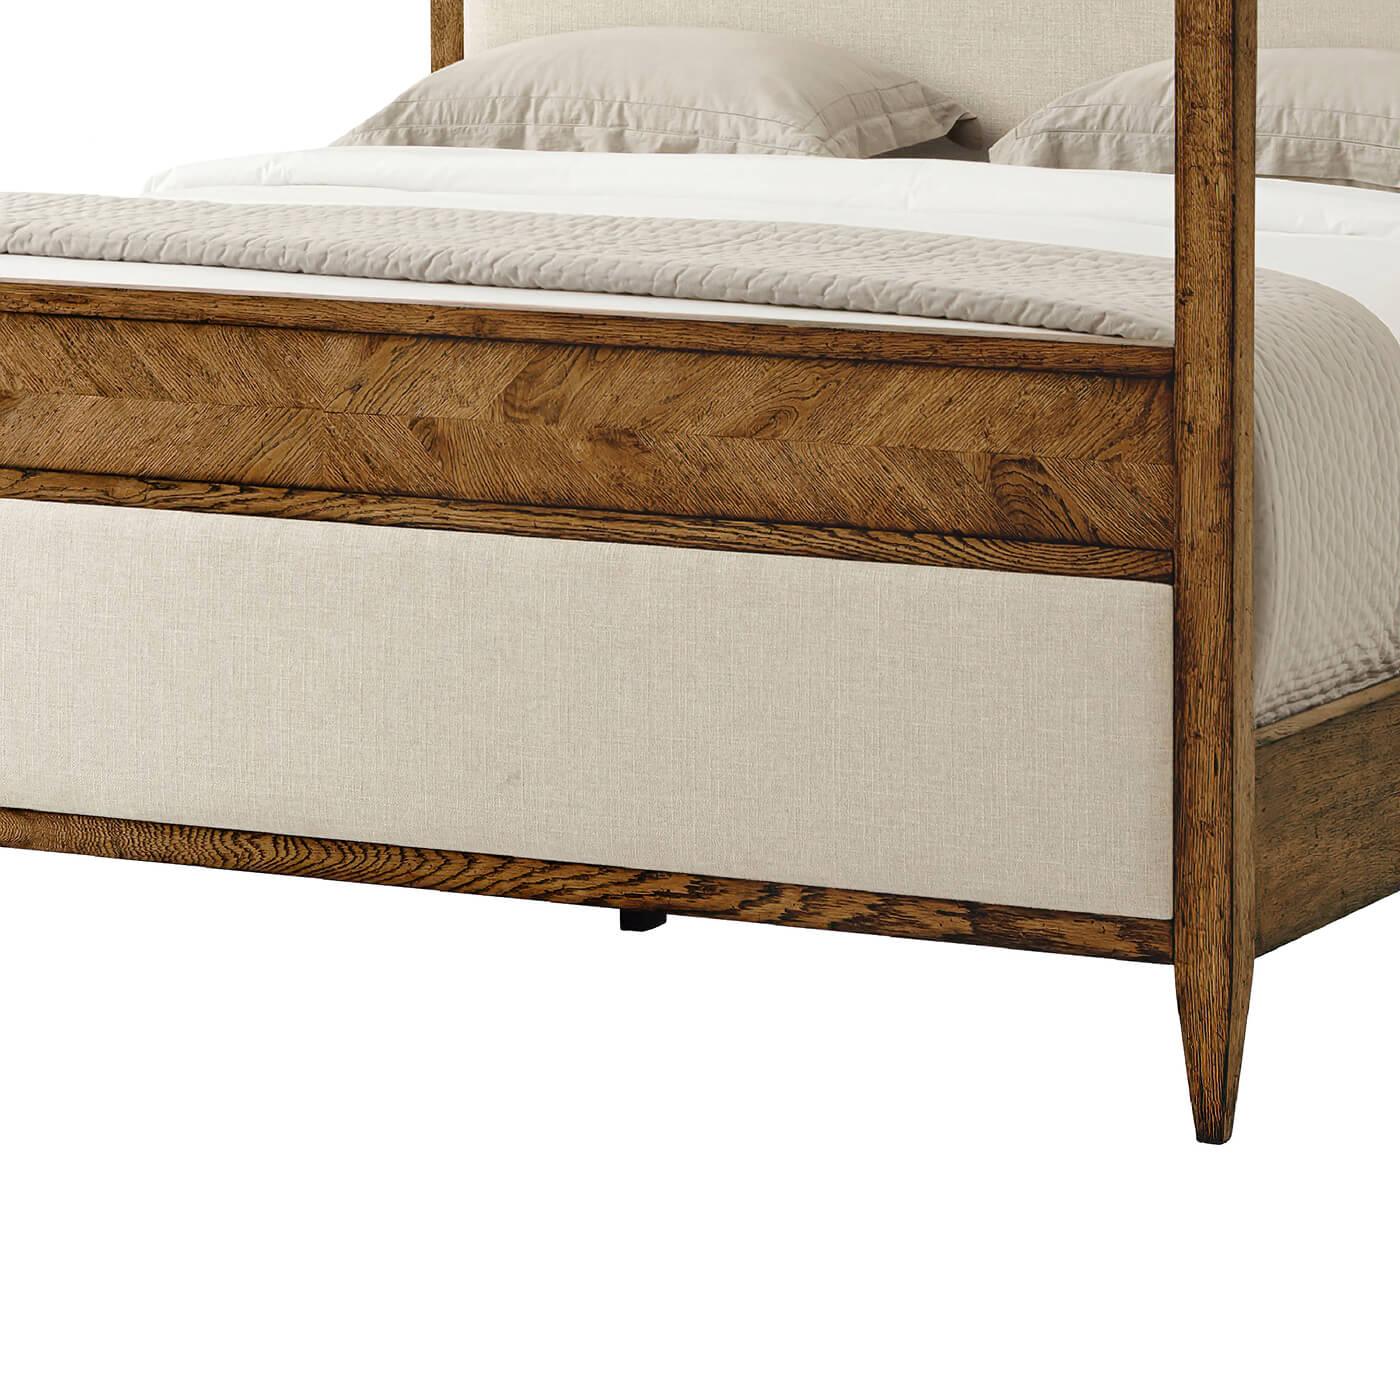 A modern rustic canopy California king bed crafted from oak with a Dusk finish. This beautifully designed bed has hand-carved oak solids and mirrored herringbone parquetry details blended with an upholstered panel on the headboard and footboard. It